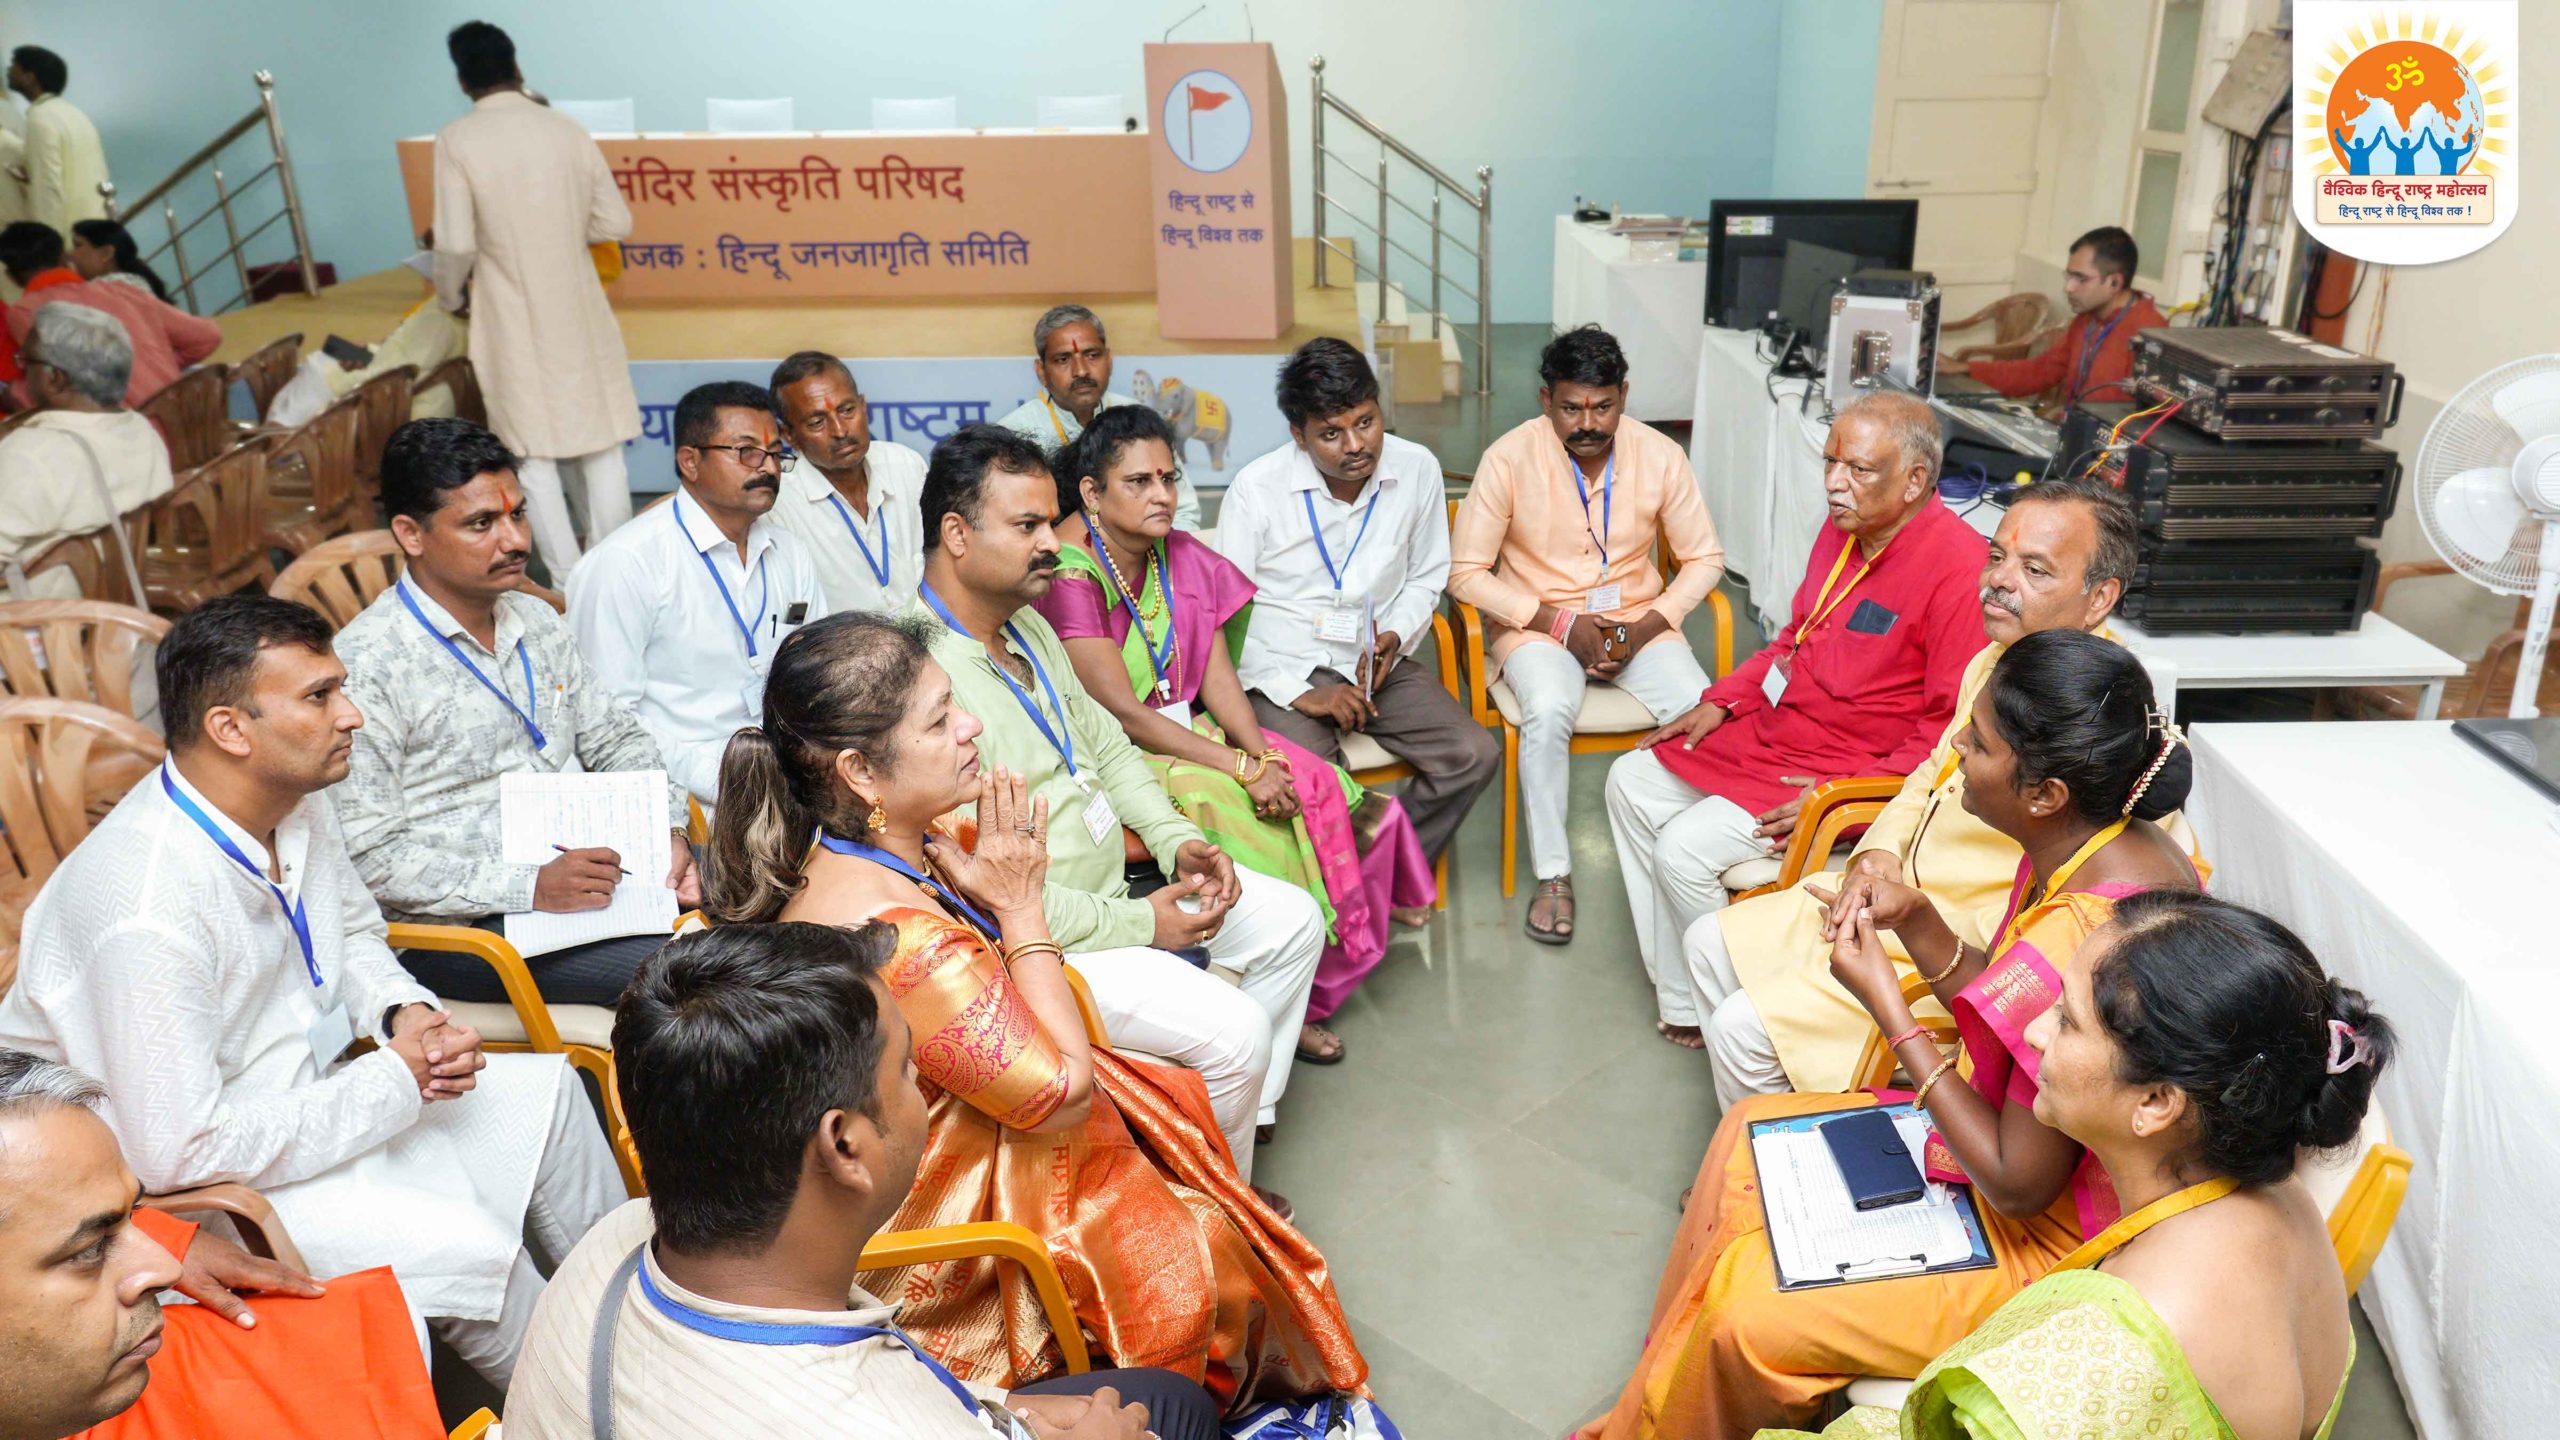 Devout Hindus planning events for promoting unity among temple trustees in their respective areas with the help of Mandir Mahasangh